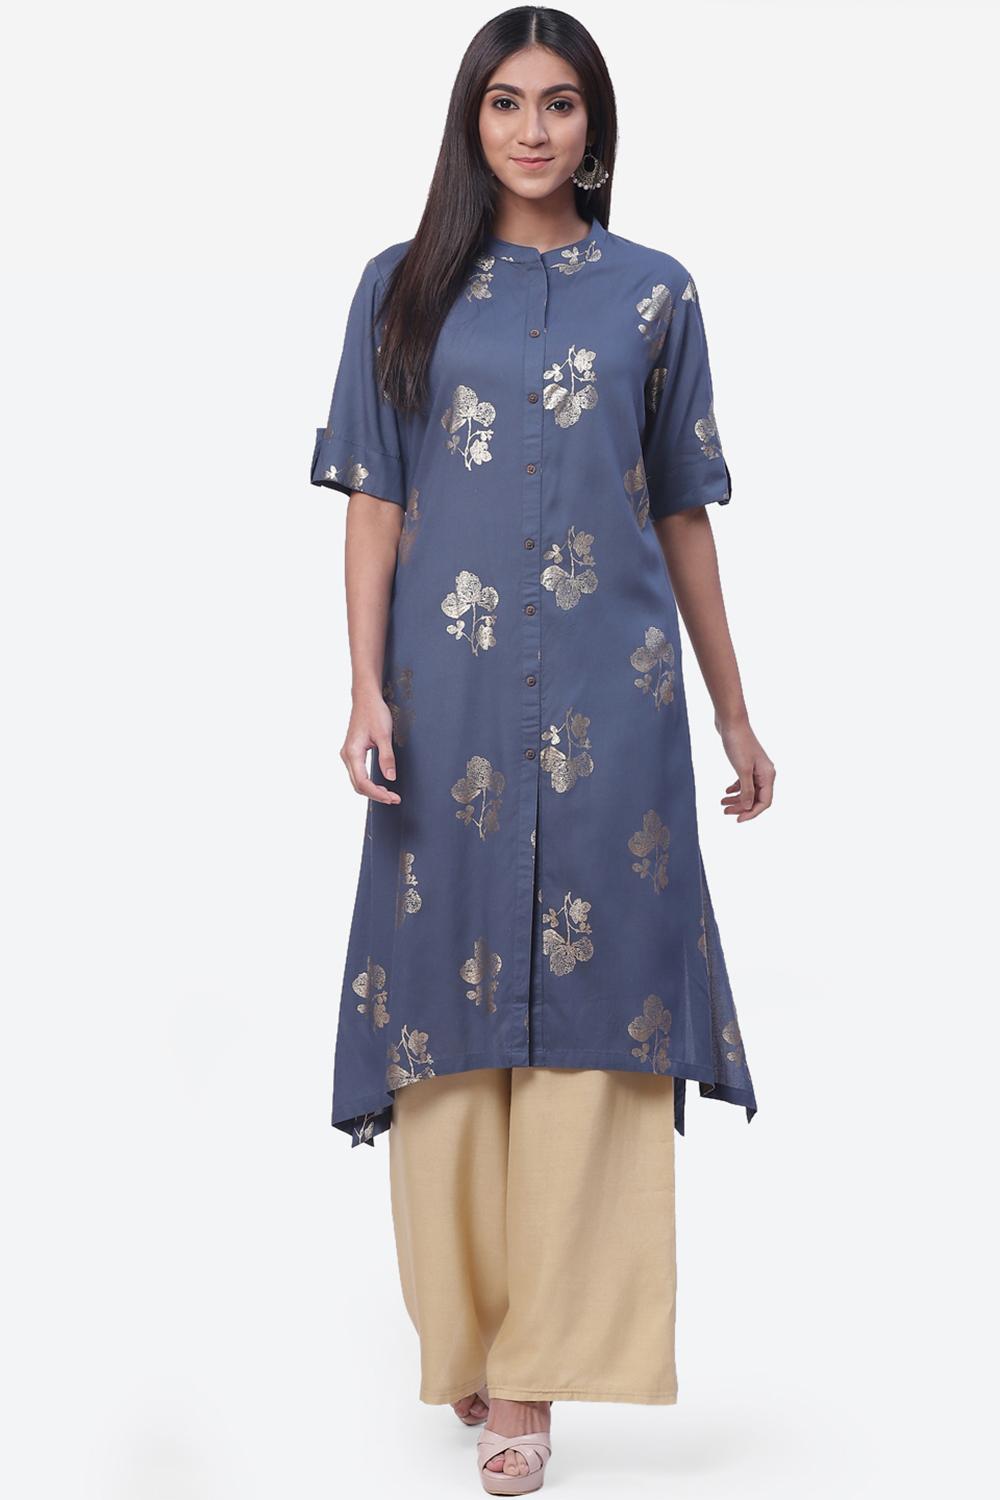 Buy Online Steel Blue Rayon Straight Dress for Women & Girls at ...